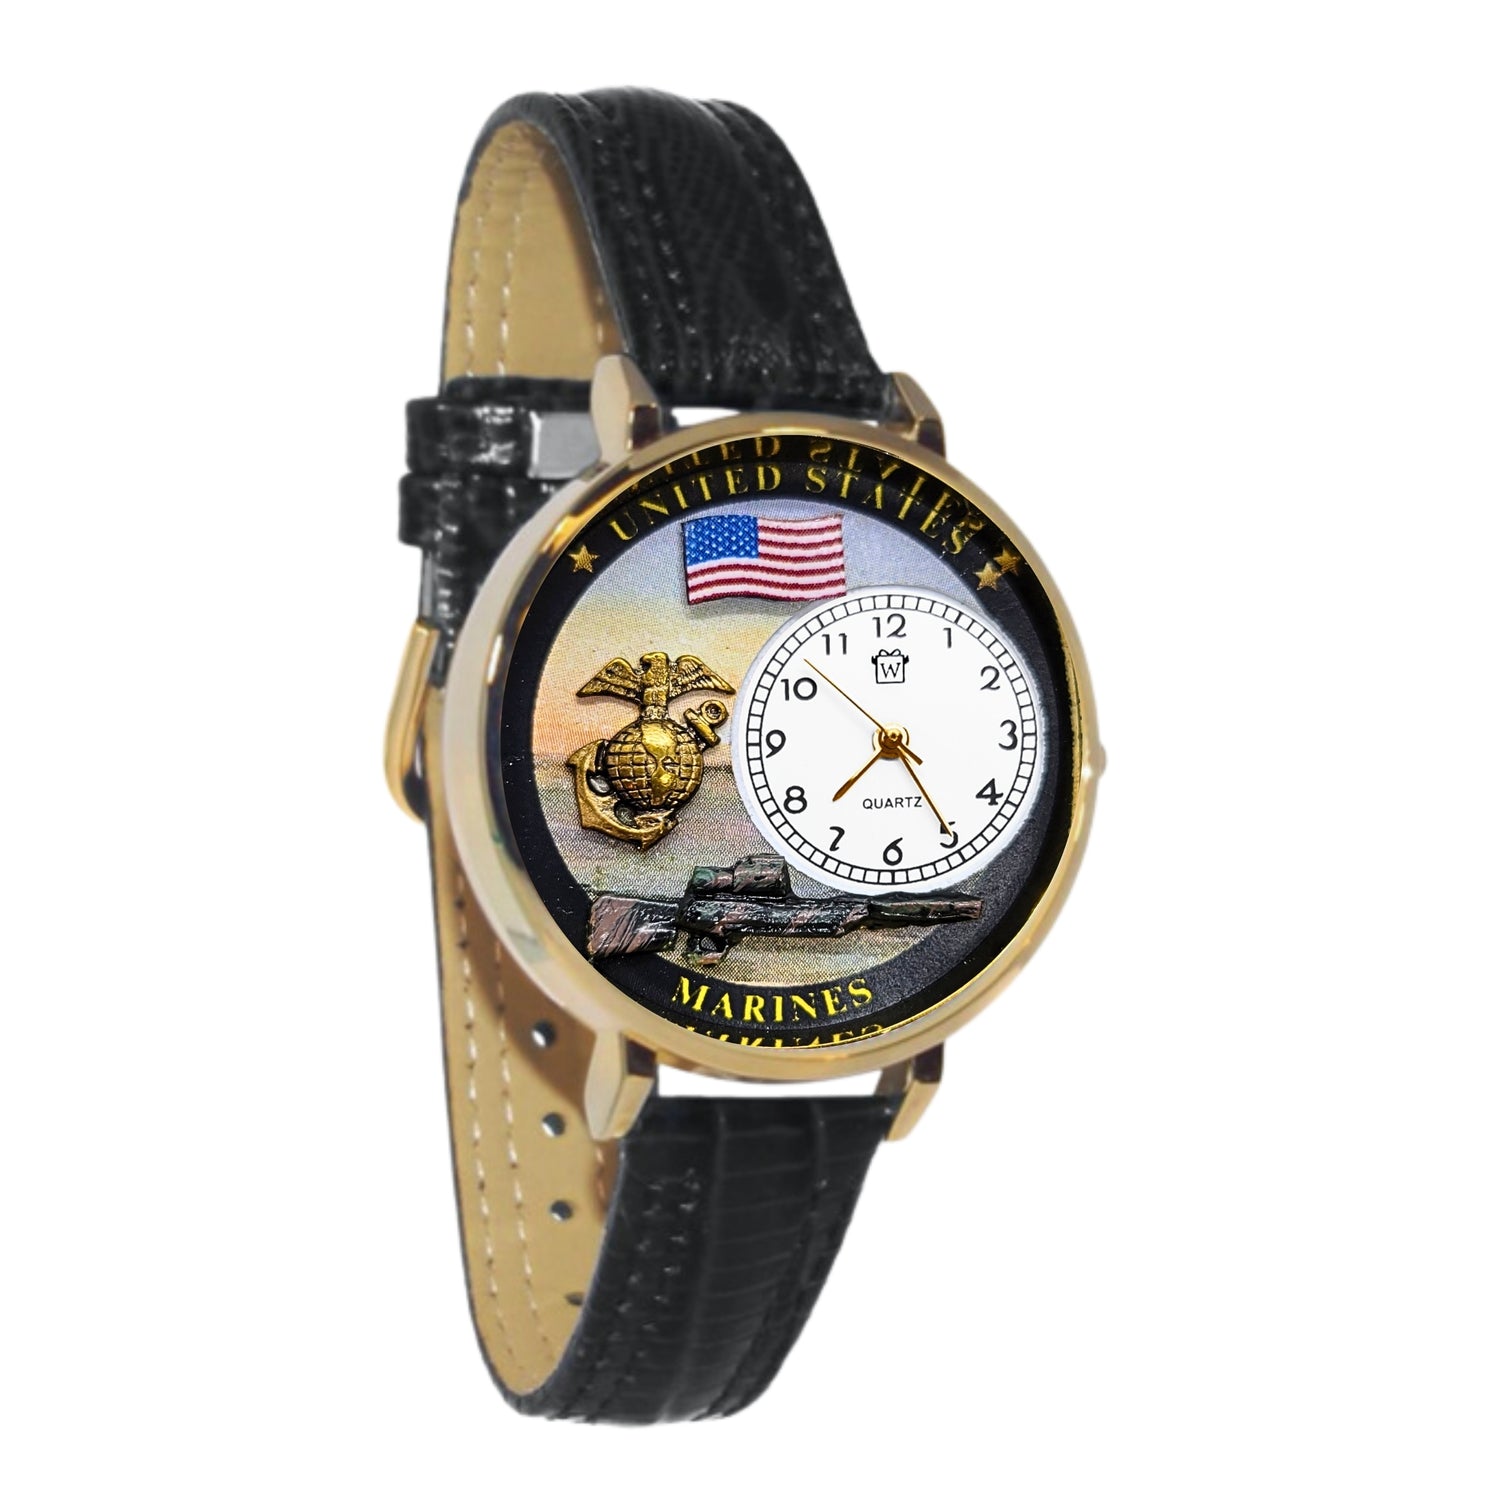 Whimsical Gifts | United States Marine Corp 3D Watch Large Style | Handmade in USA | Patriotic |  | Novelty Unique Fun Miniatures Gift | Gold Finish Black Leather Watch Band